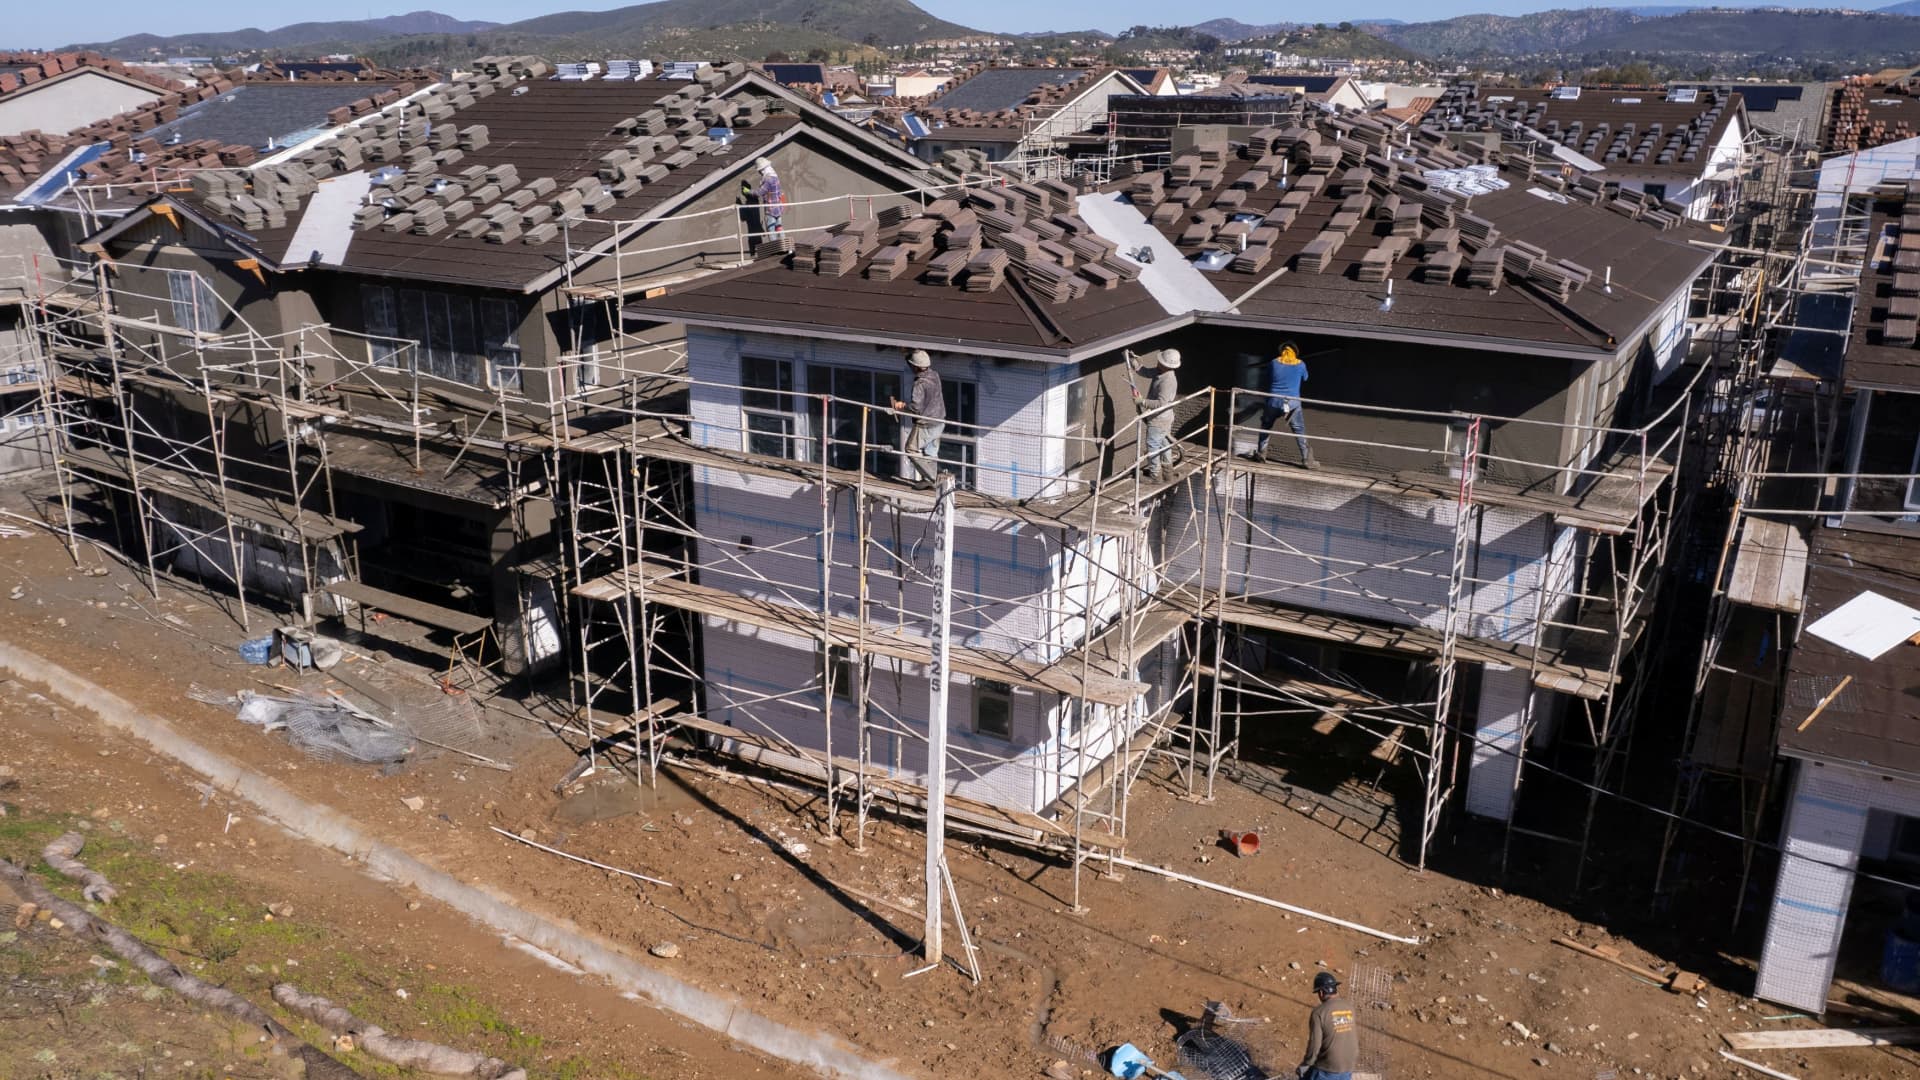 Homebuilders say demand is rising, but they’re concerned about a banking fallout